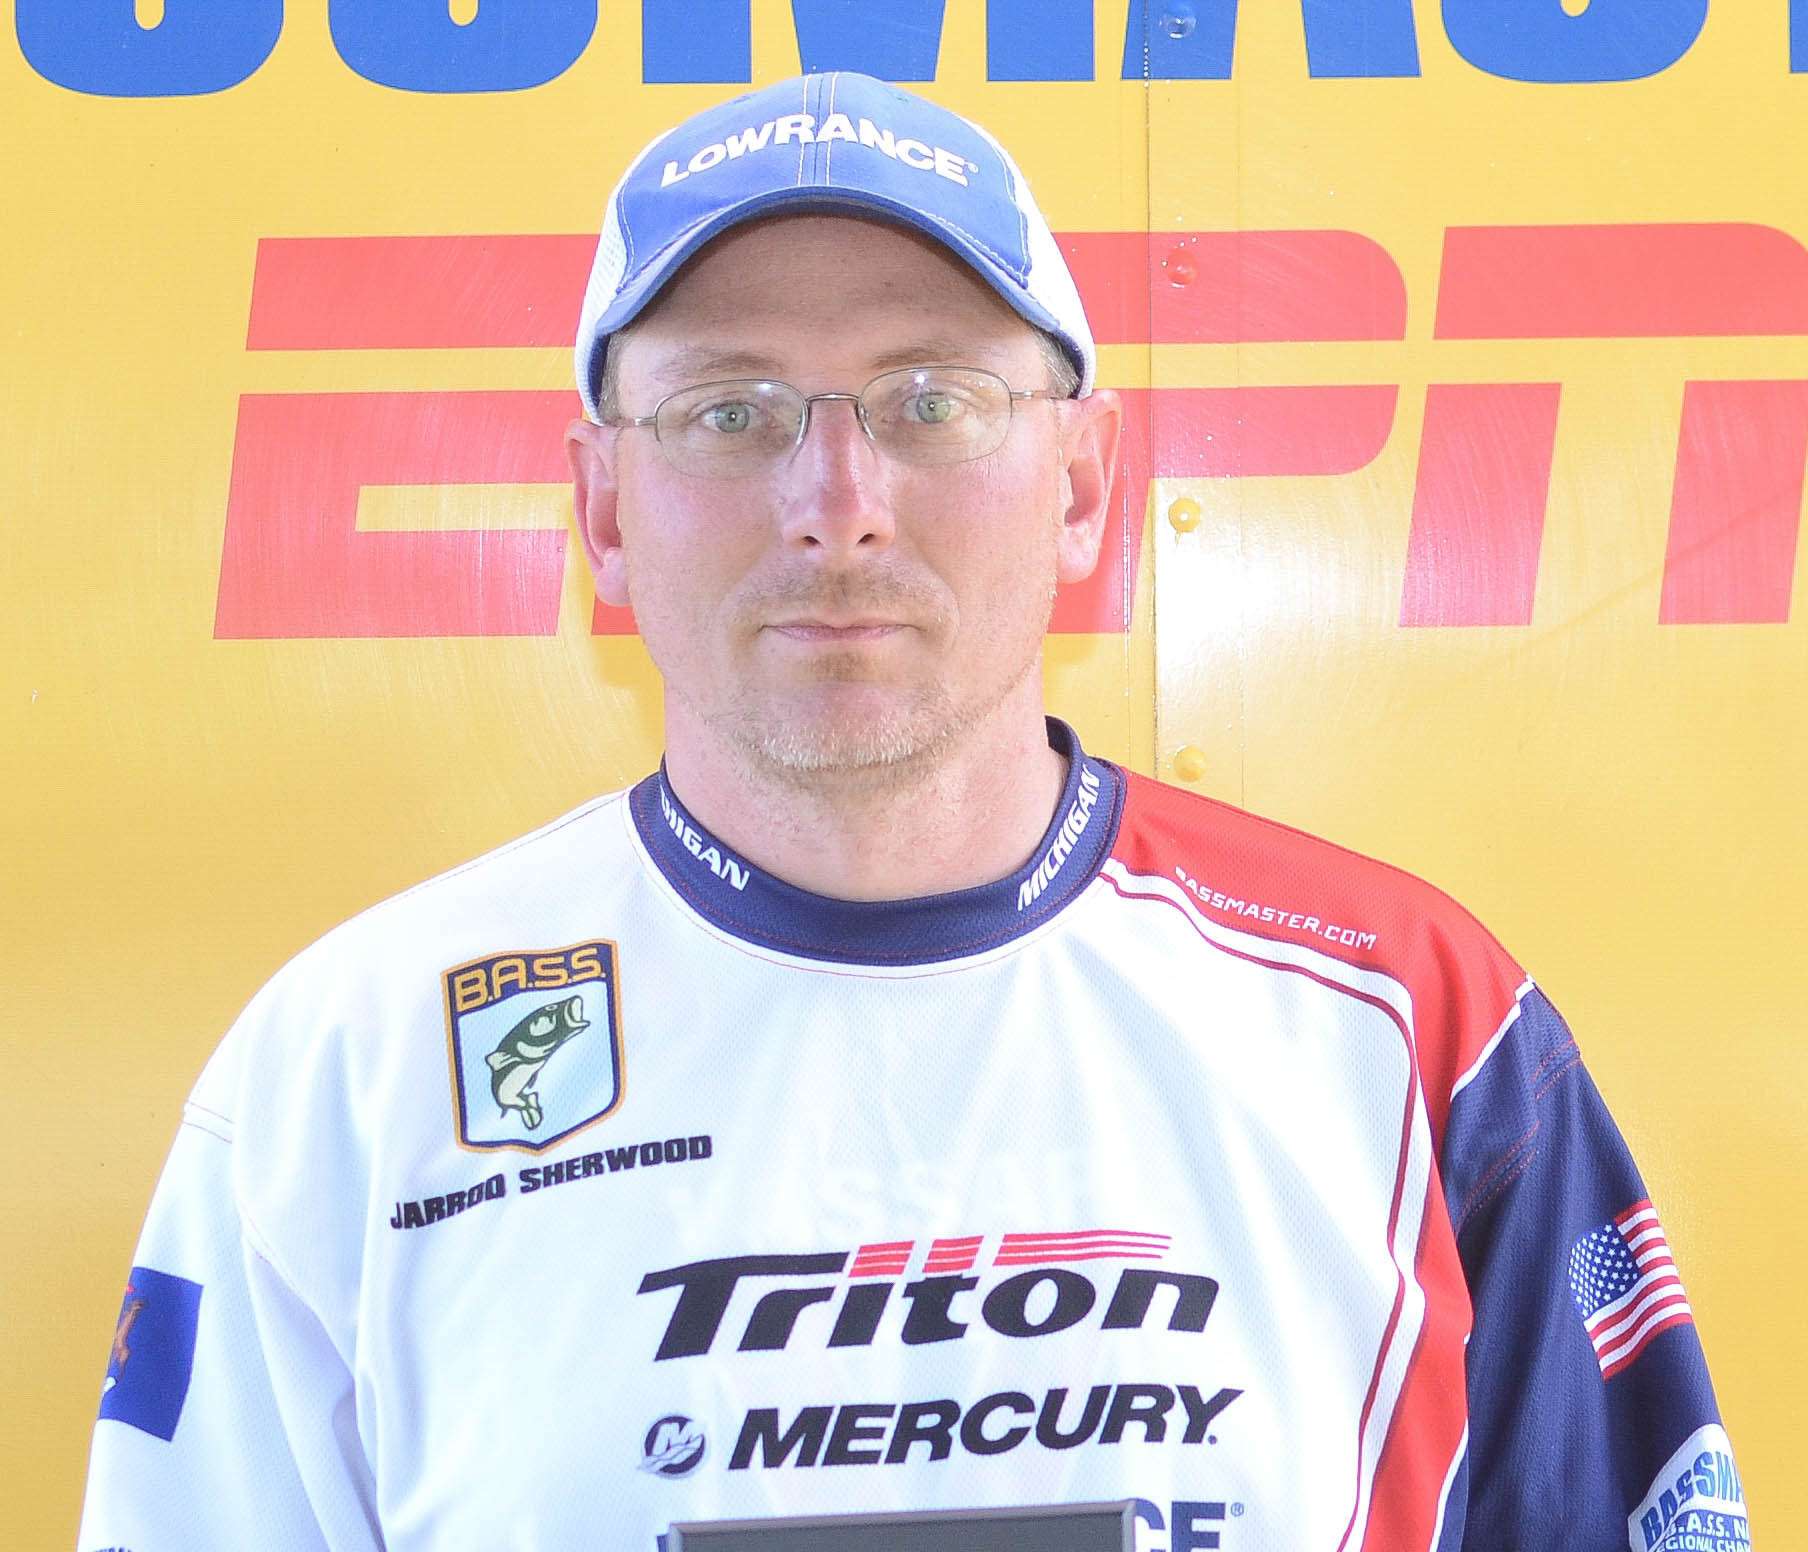 Jarrod Sherwood <br>
Michigan Nonboater <br>
Jarrod Sherwood is a design engineer, but he prefers to spend his time hunting or fishing. Heâs a member of Team Bass, and this will be his first Nation Championship. 